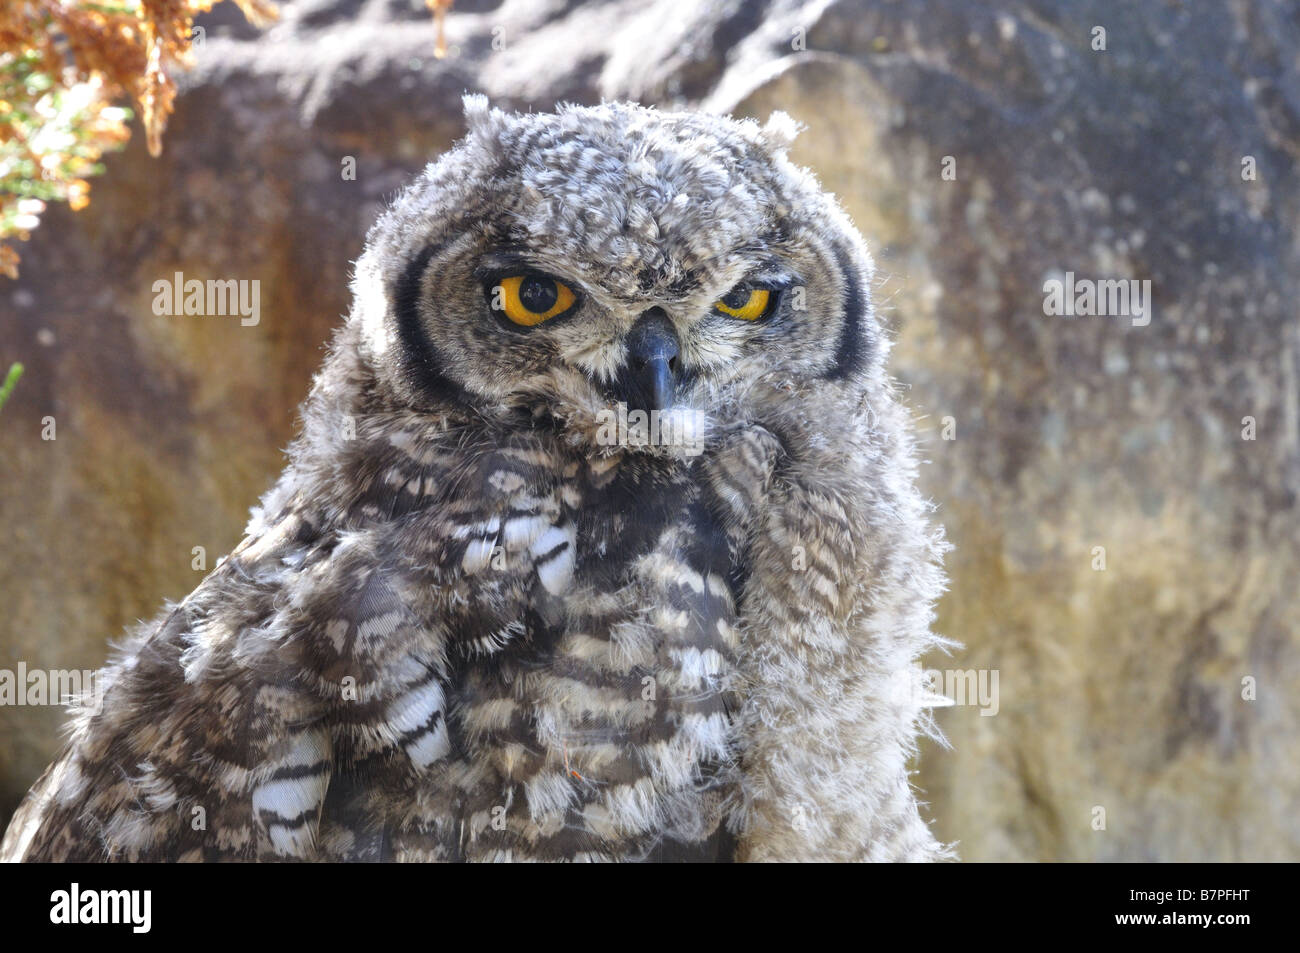 Juvenile Spotted Eagle Owl at Kirstenbosch Gardens Stock Photo